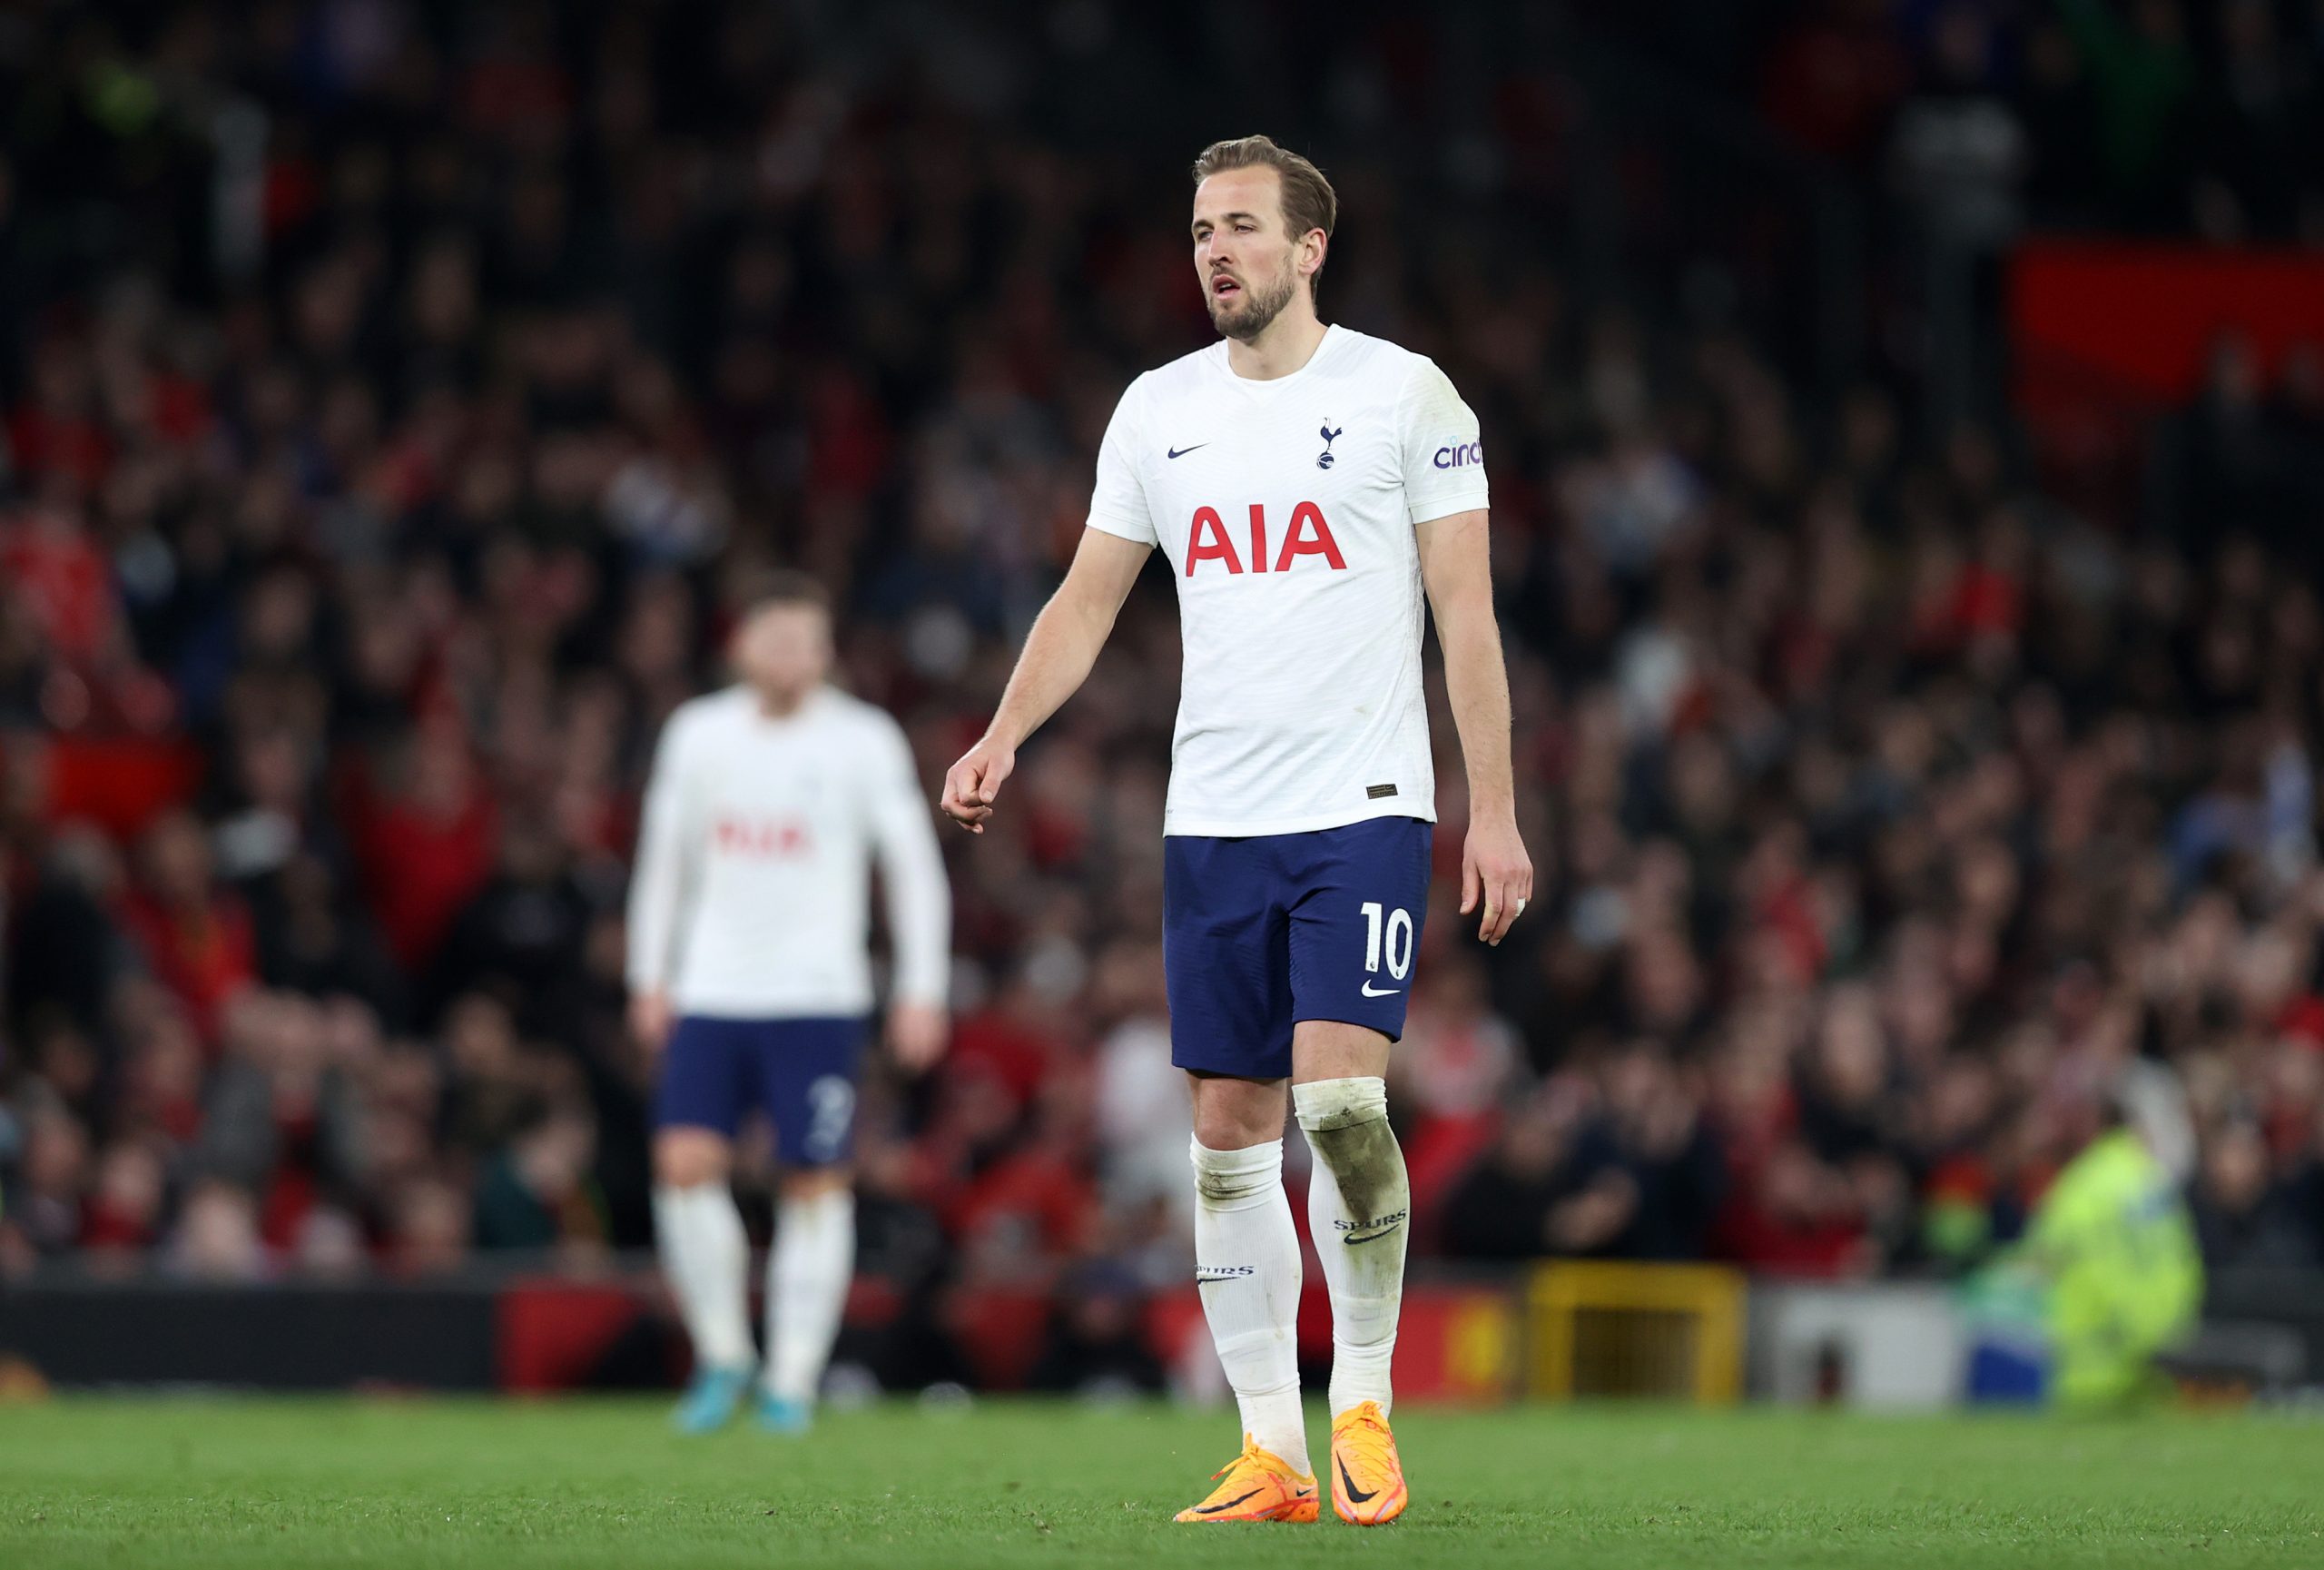 Harry Kane in action for Tottenham against Manchester United. (Photo by Naomi Baker/Getty Images)